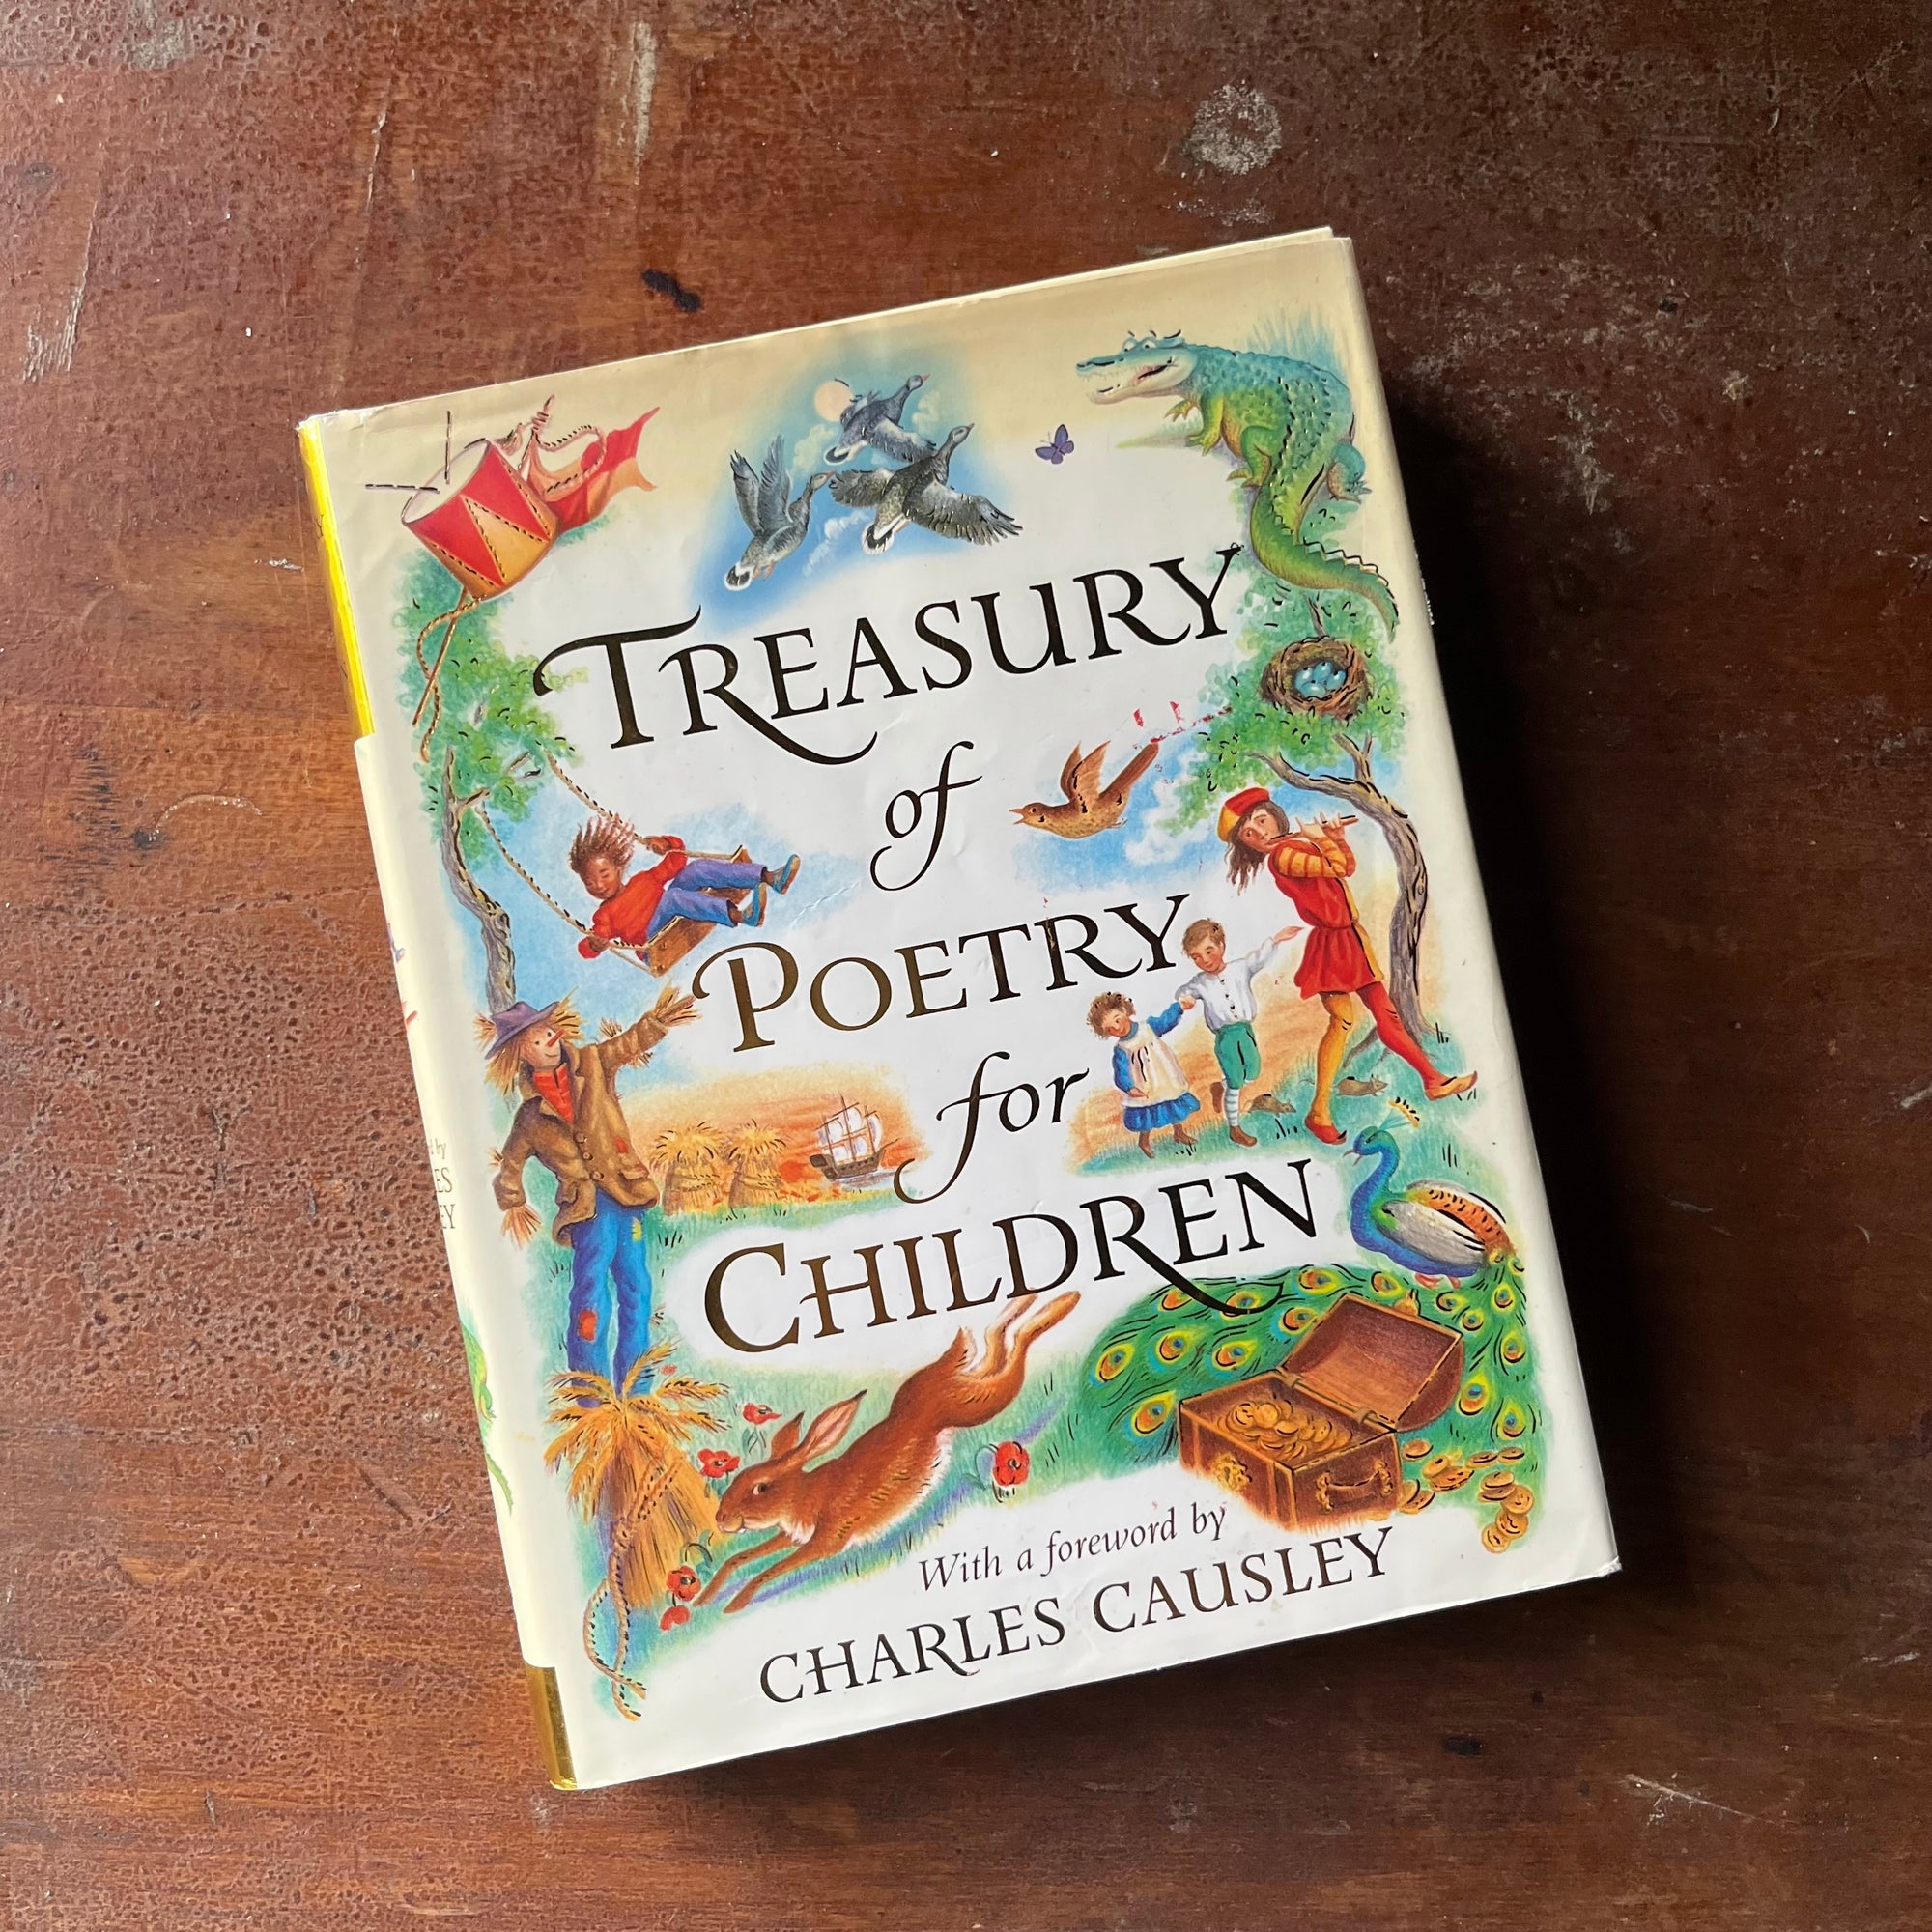 vintage children's poetry, children's anthology of Poetry - Treasury of Poetry for Children Selected by Susie Gibbs with Foreword by Charles Causley and illustrations by Daz Wallis - view of the dust jacket's front cover